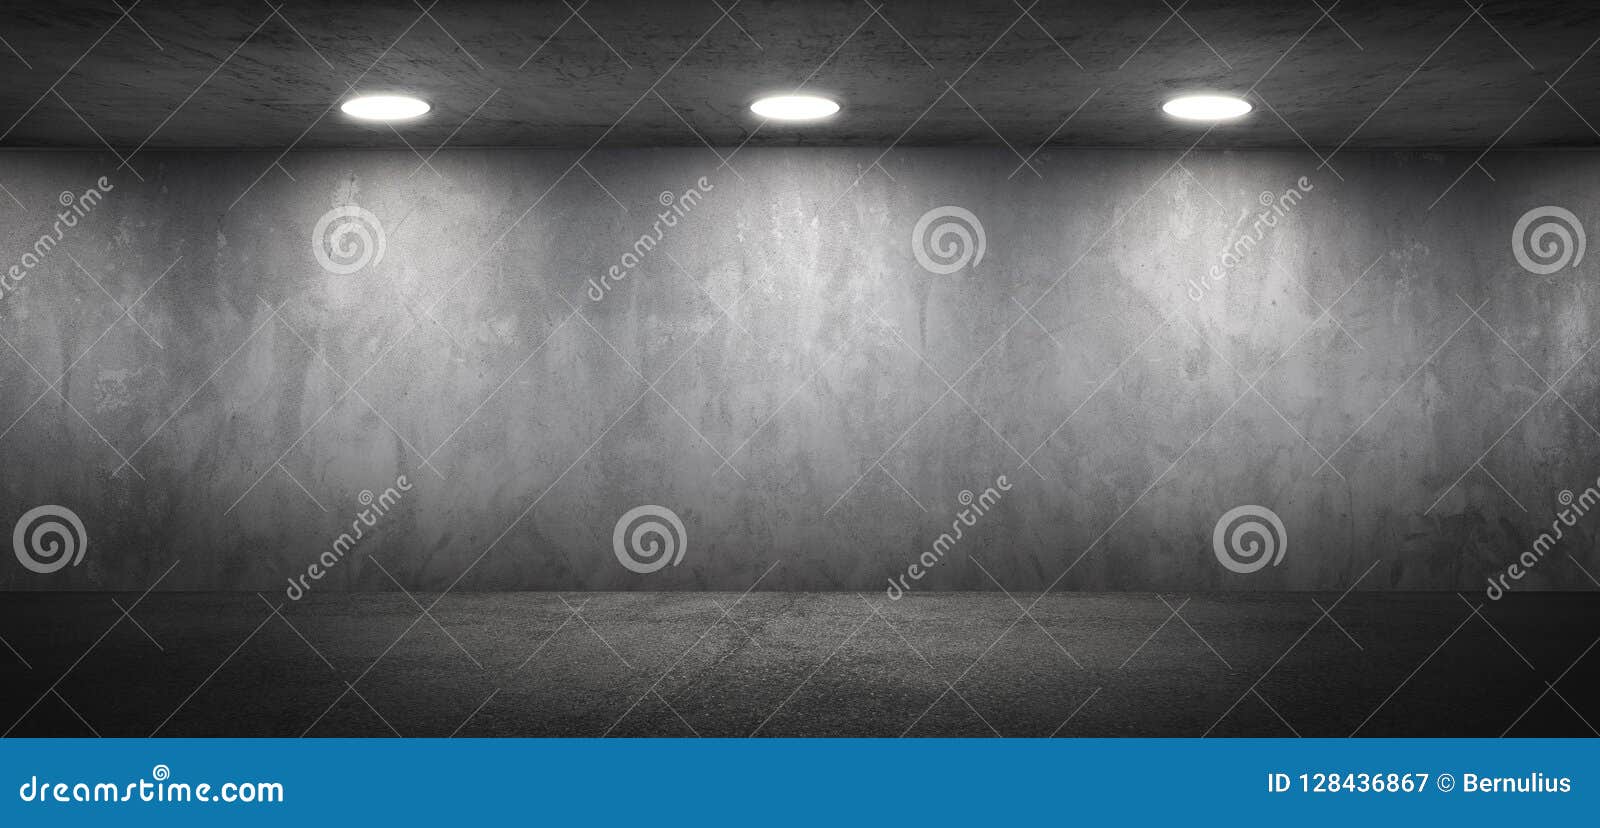 Blank Concrete Office Room Textured Wall Background Stock